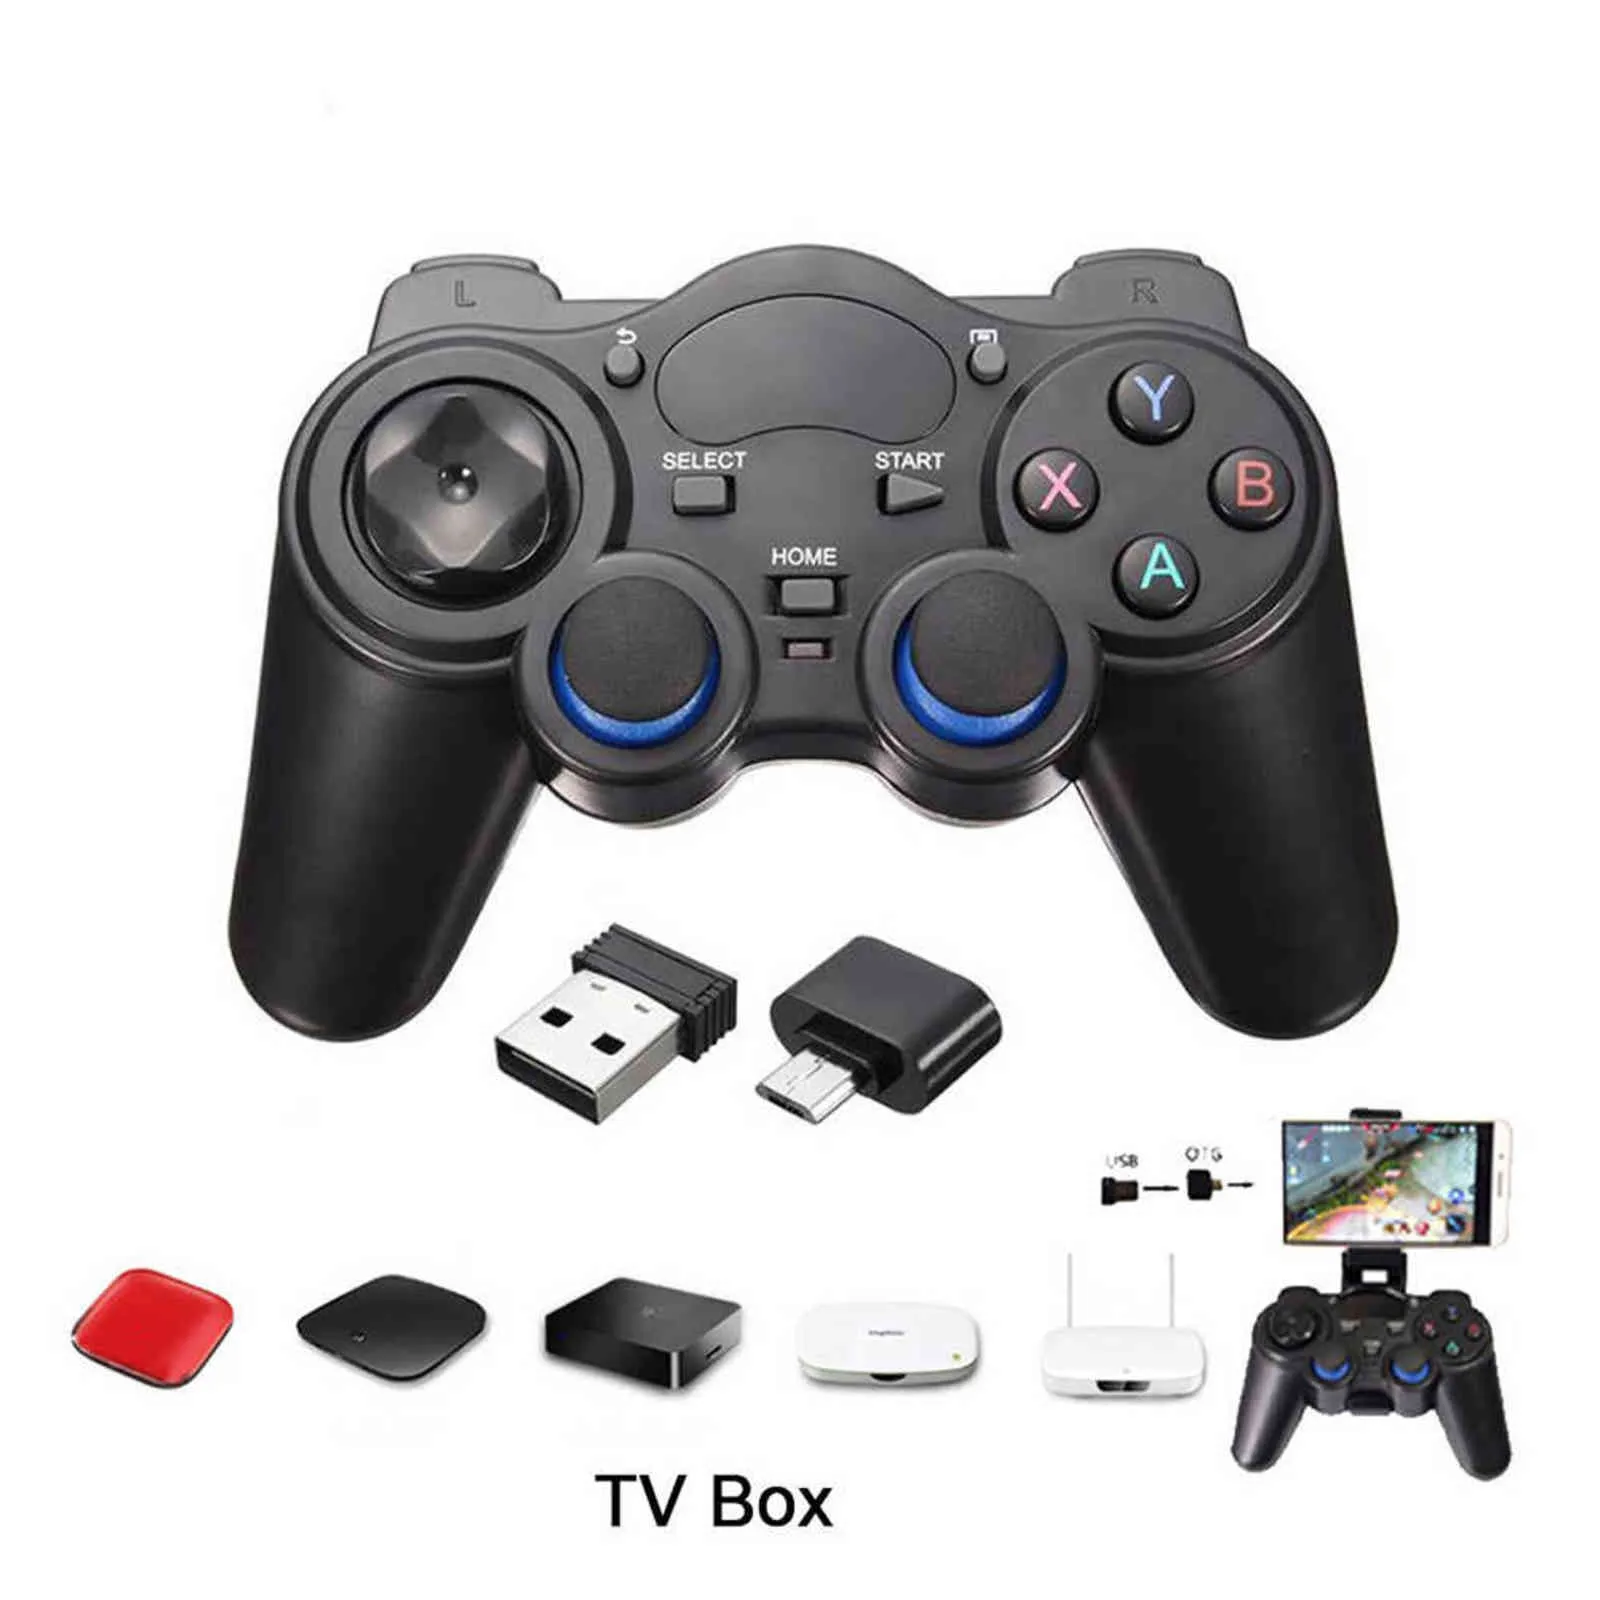 2.4G USB Wireless Game Controller Gamepad For Android Phone Joystick Joypad with OTG Converter Adapter For PS3 Tablet PC TV Box H1126